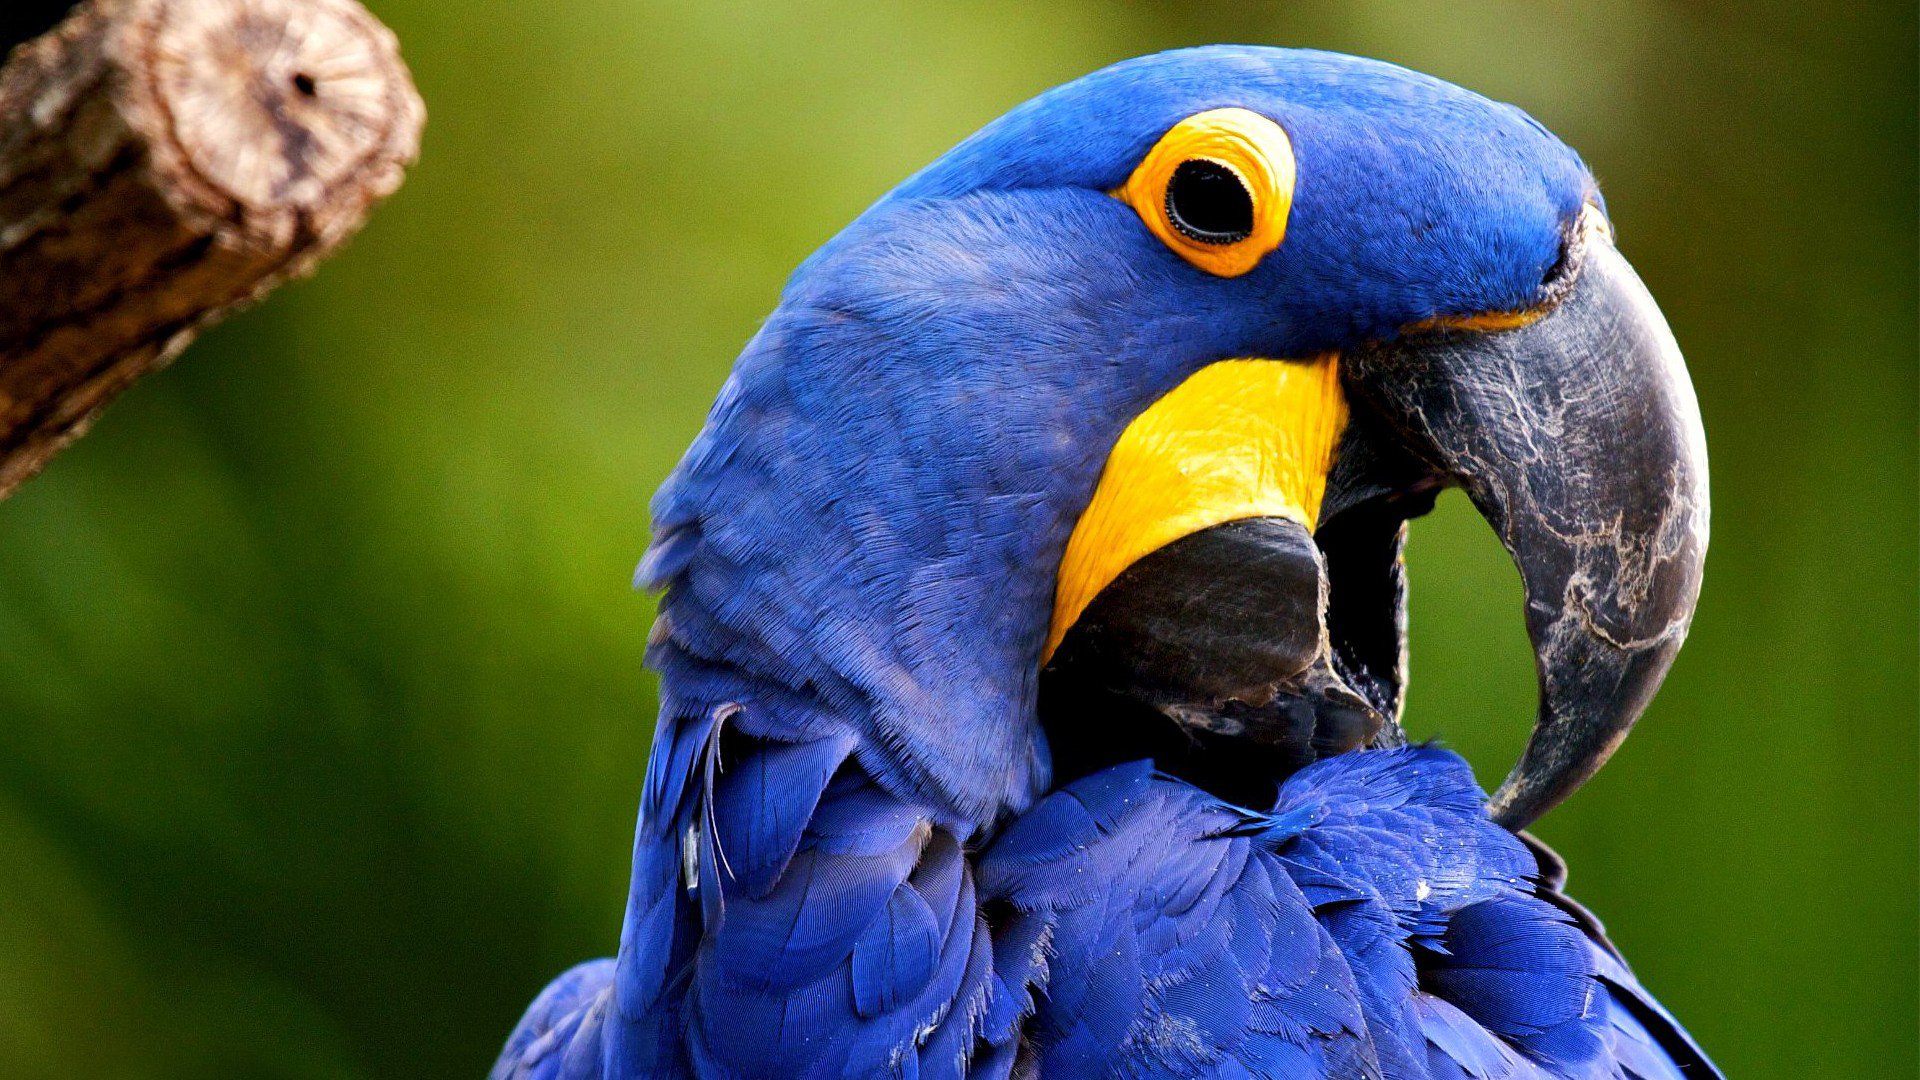 Macaws are beautiful brilliantly colored members of the parrot family